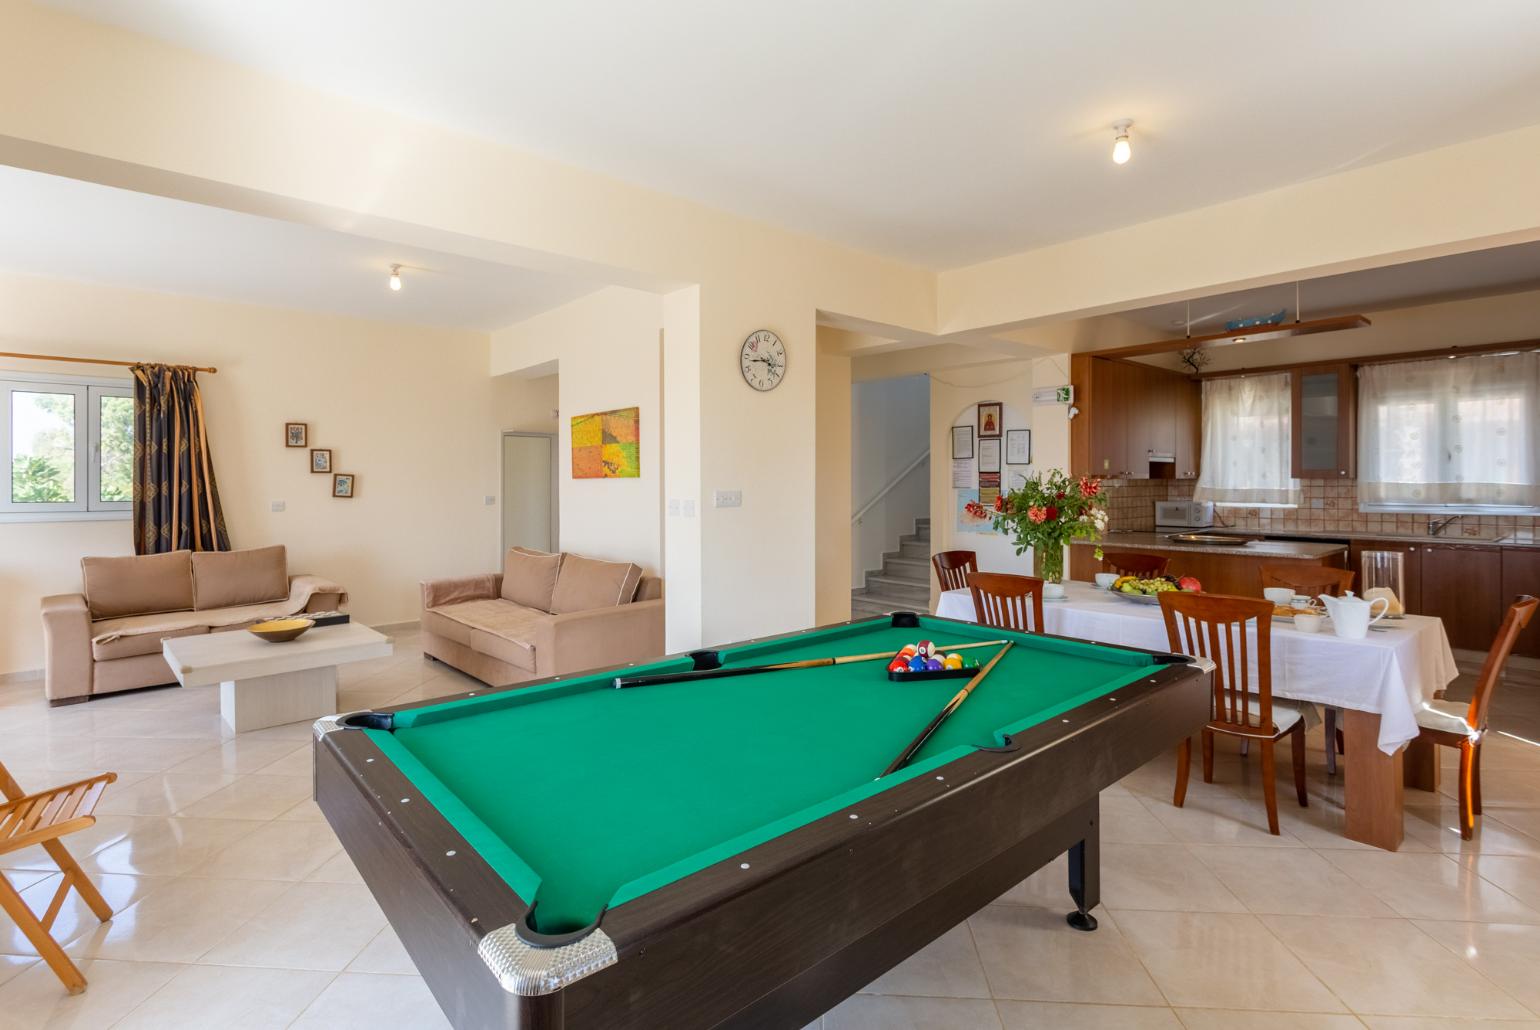 Open-plan living room with sofas, dining area, kitchen, ornamental fireplace, A/C, WiFi internet, satellite TV, pool table, foosball table, and terrace access with sea views